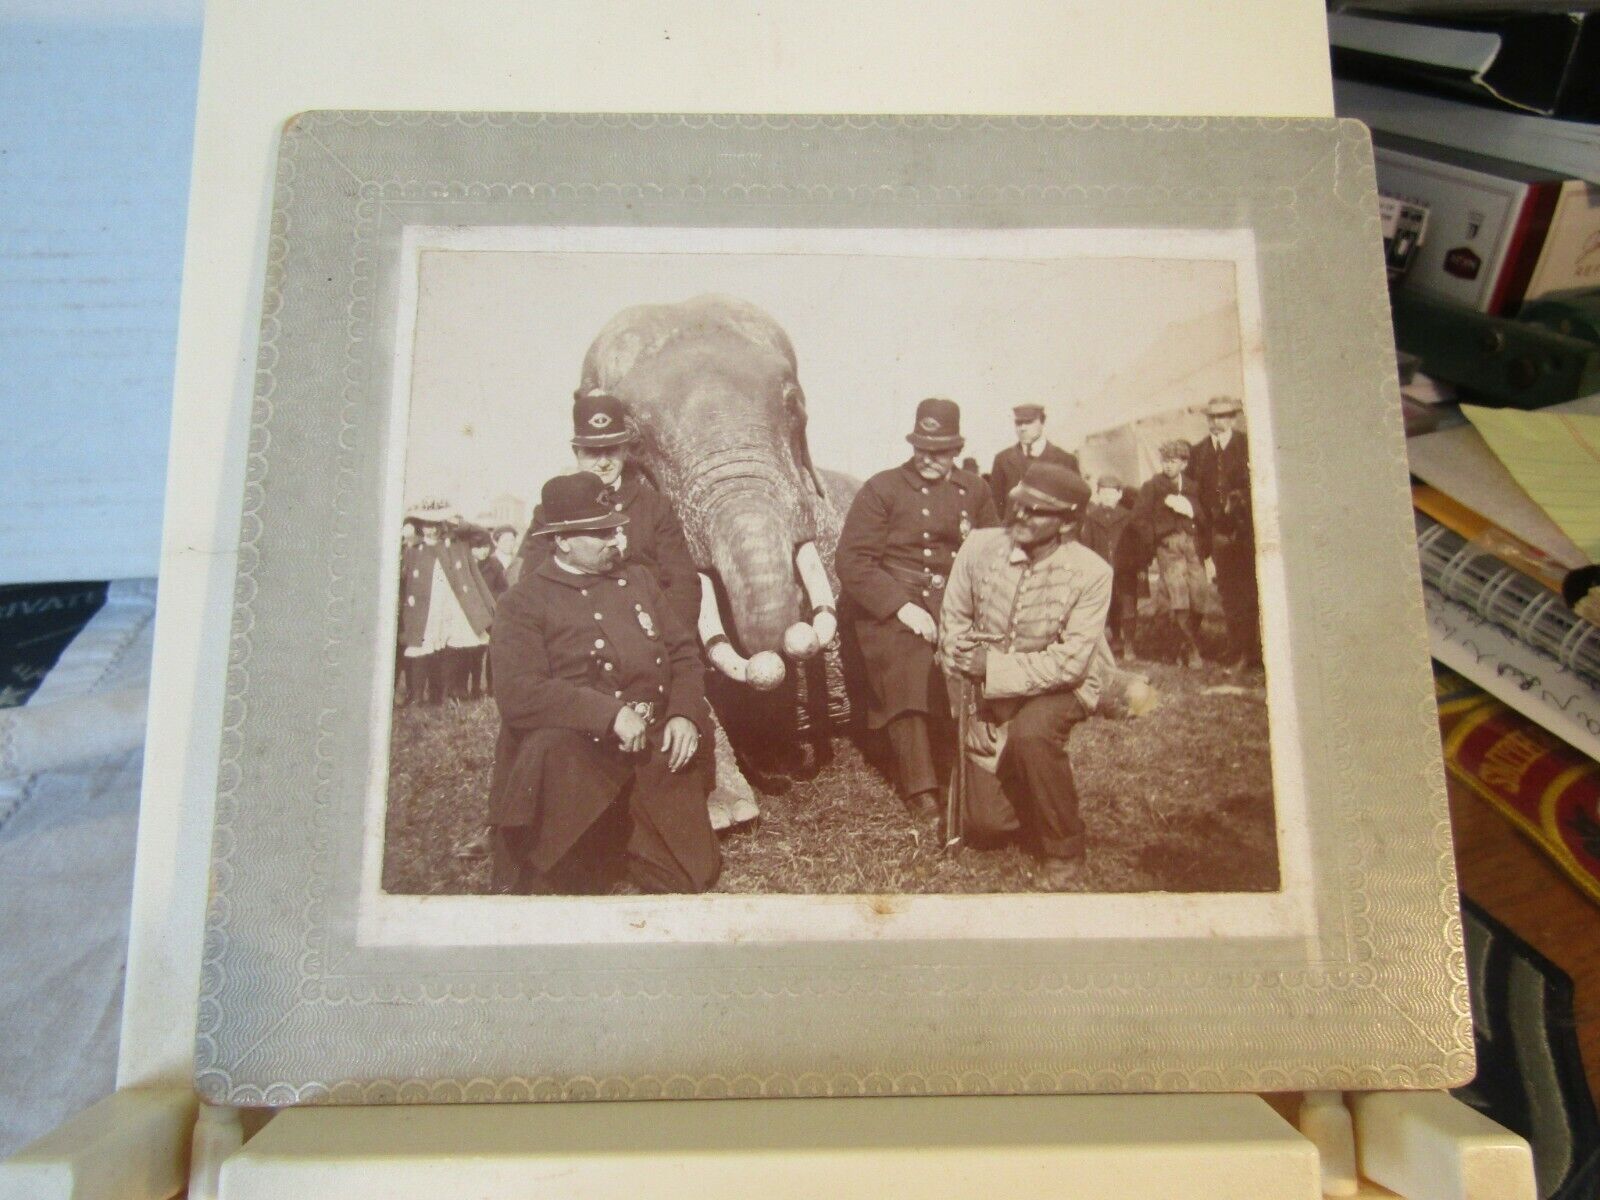 Antique Police Officers Cabinet Card Photo with Circus Elephant 1890-1900 NYC? 